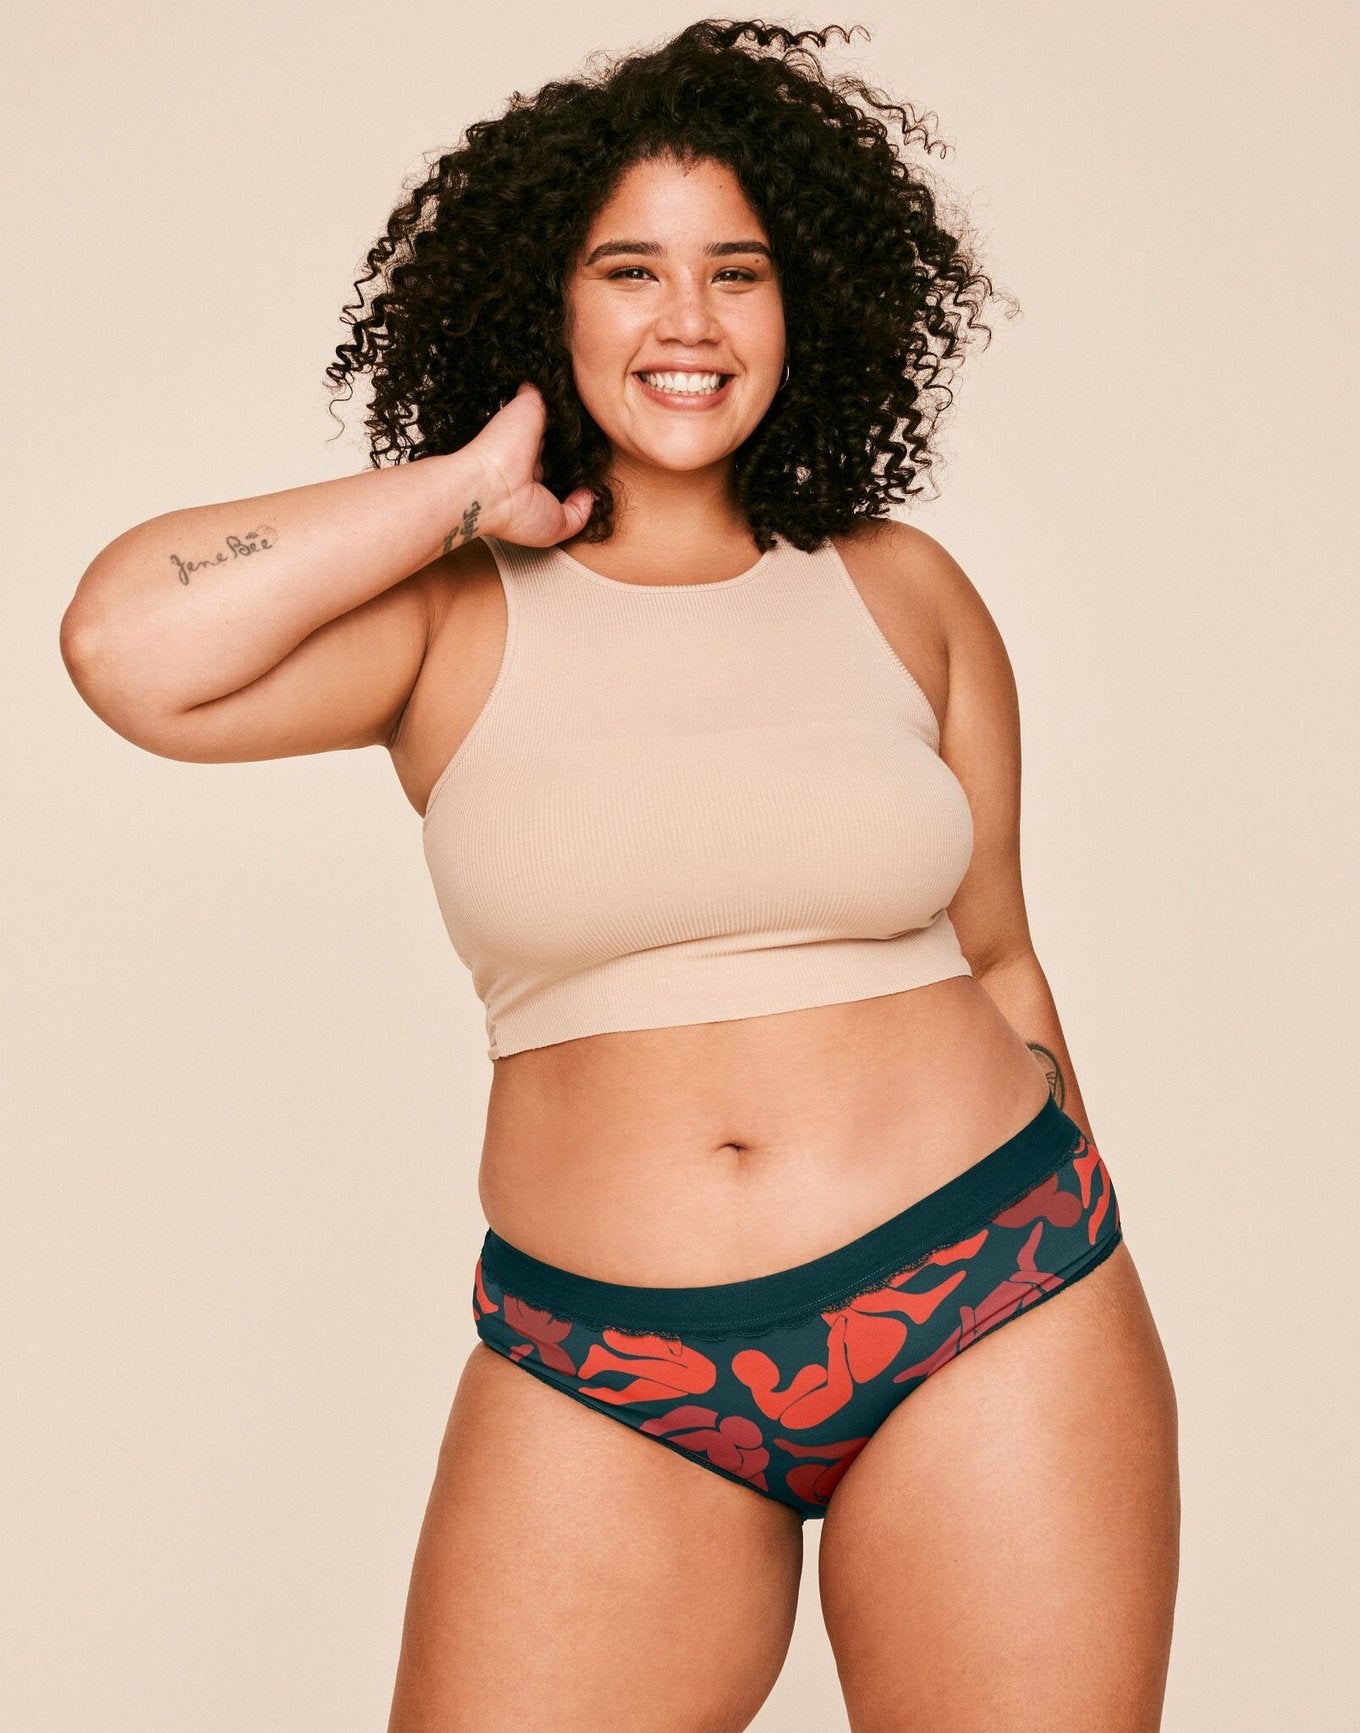 Knix underwear review for the plus size, apple shade babes